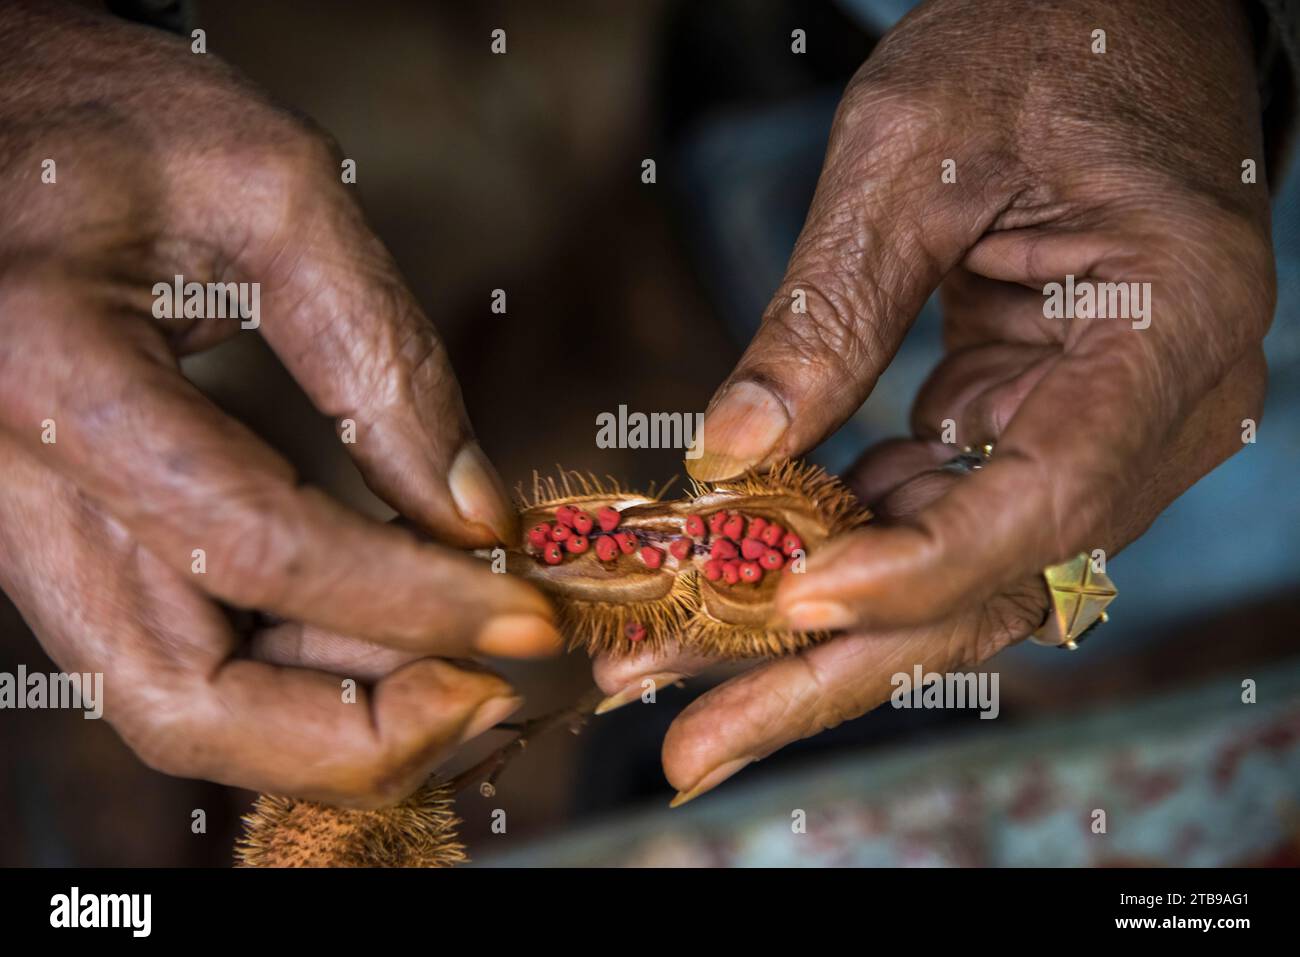 At an organic farm, annatto seeds are harvested to use to color rice to make it yellow; Cuba Stock Photo